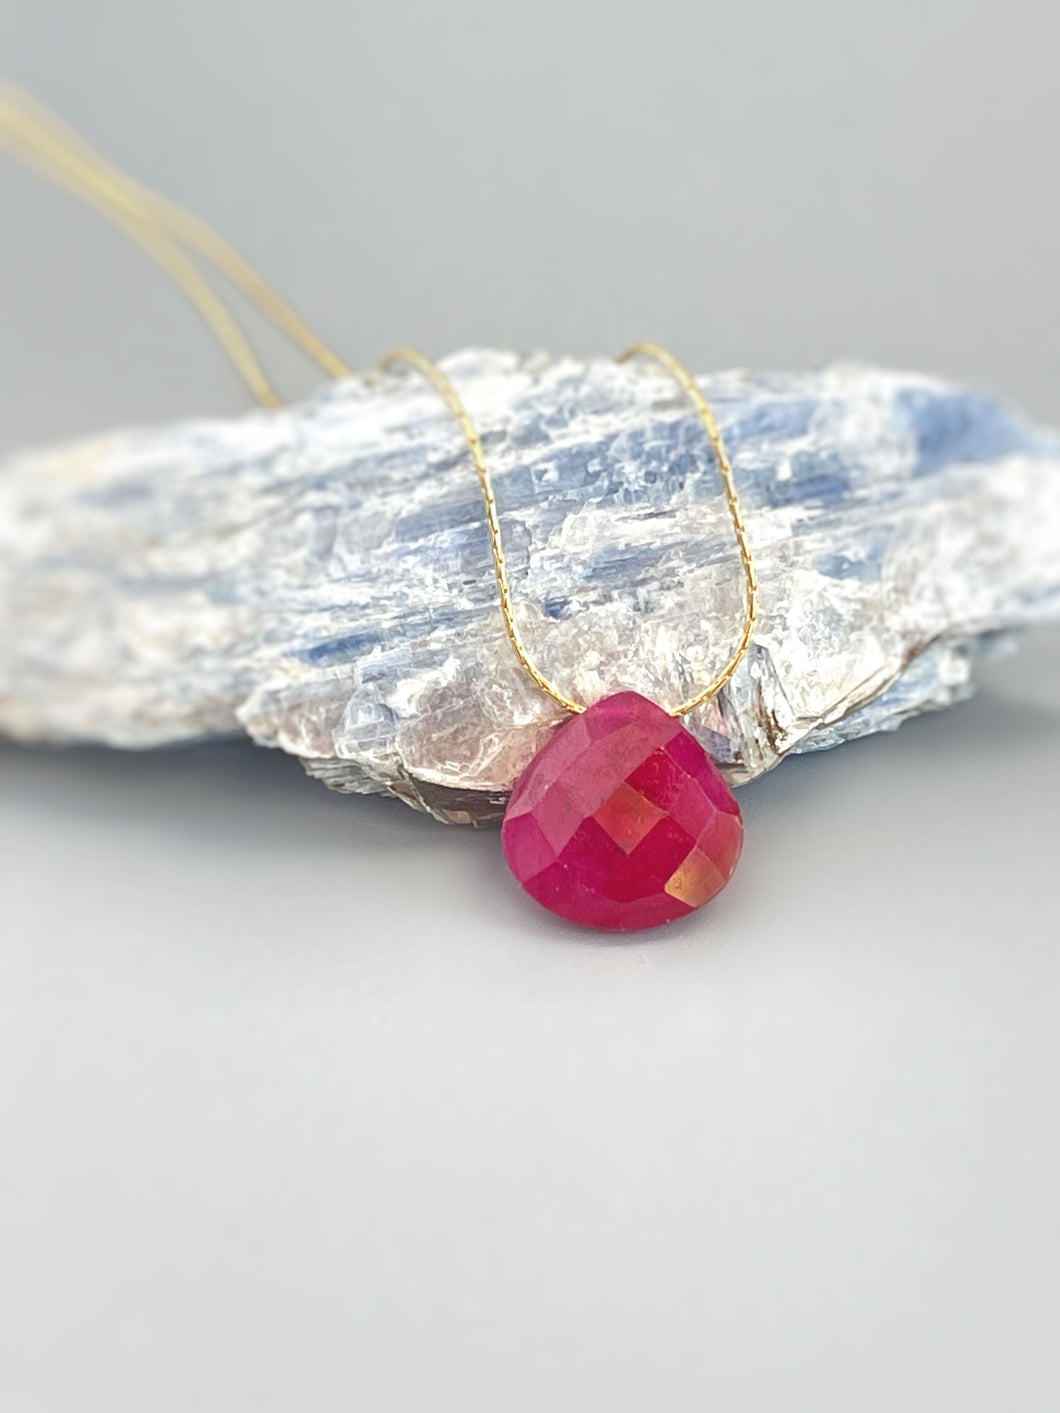 Ruby Necklace gemstone Solitaire Necklace